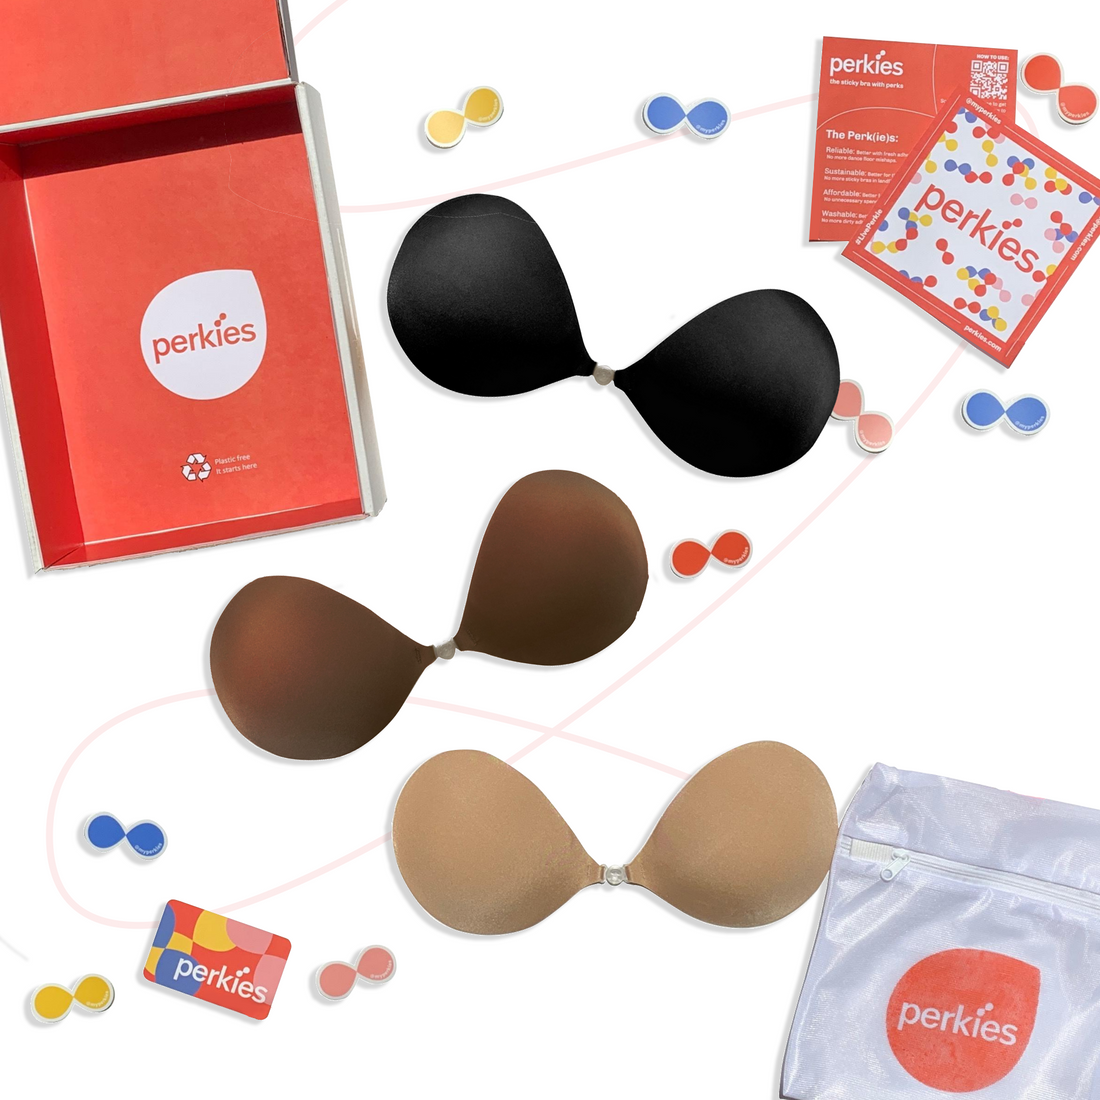 Meet Our Newest Product - The Perkies Sticky Bra!